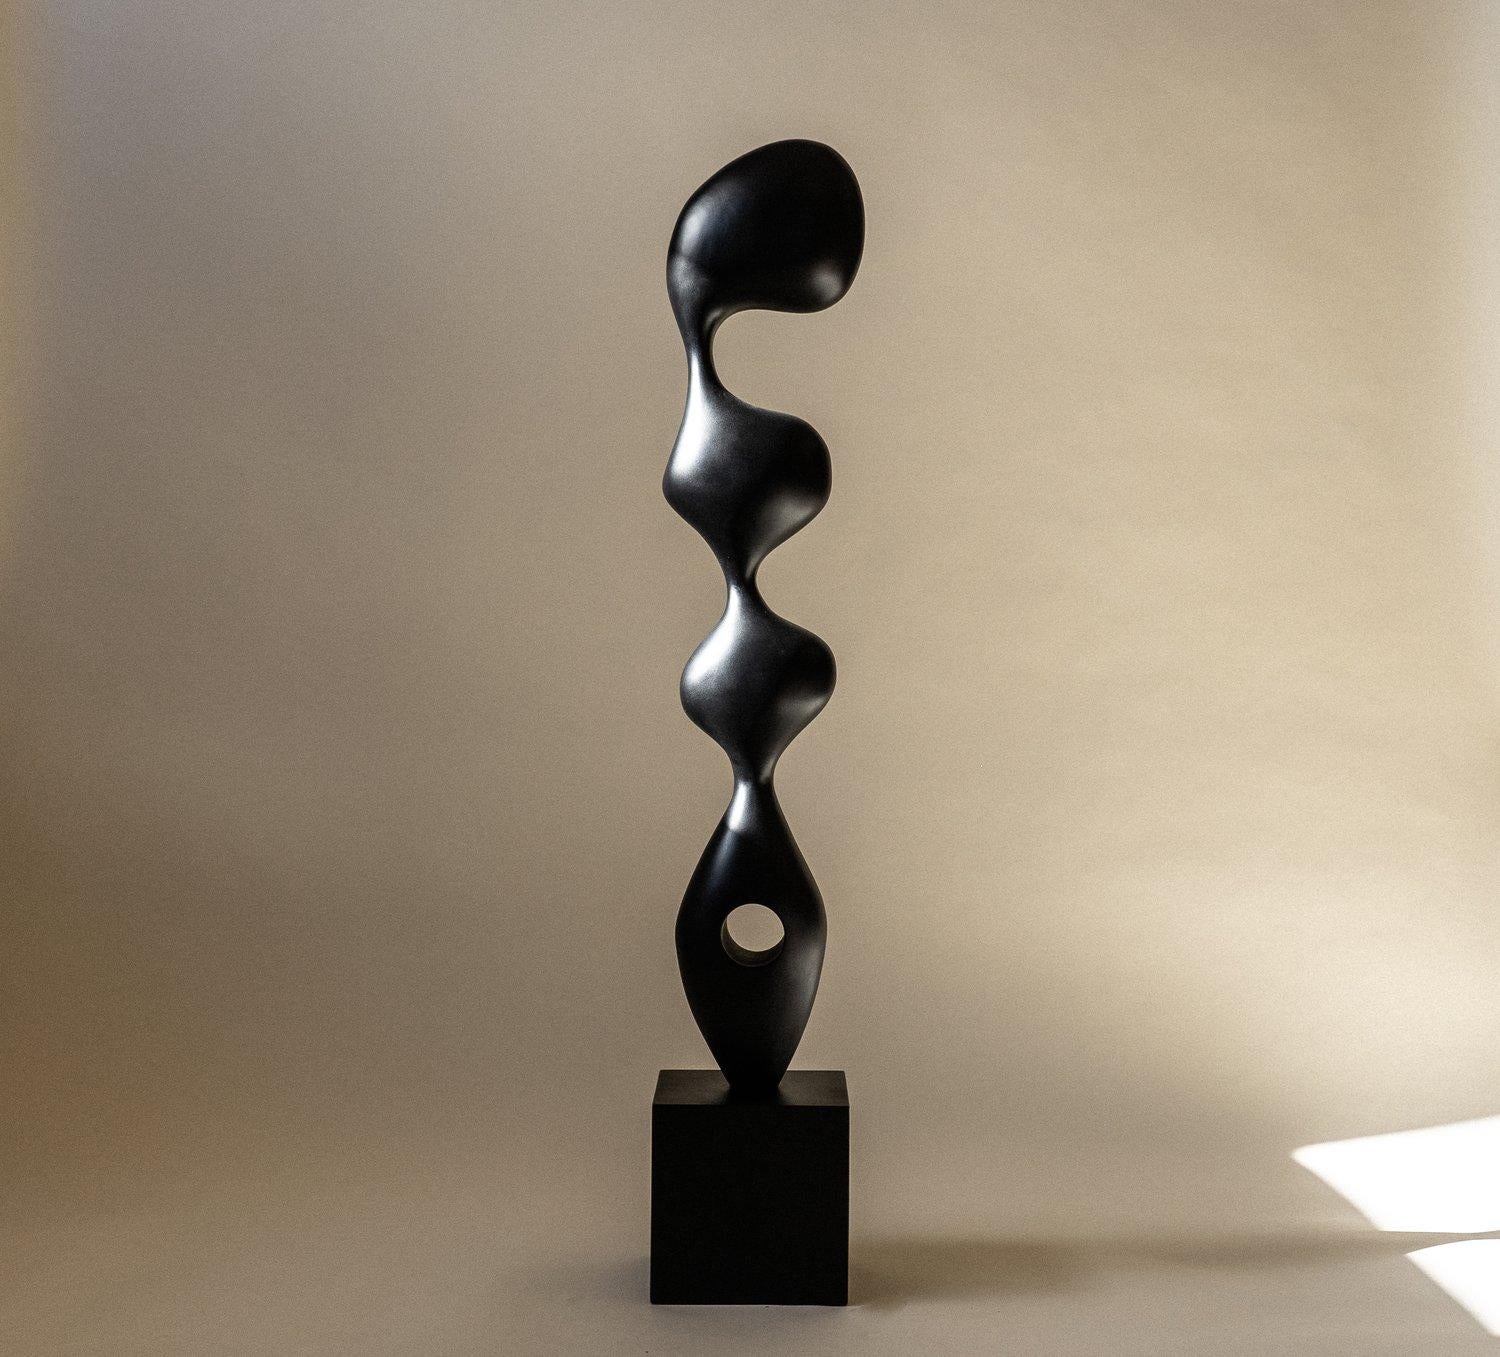 Kensho Sculpture by Chandler McLellan
Limited Edition of 15 Pieces.
Dimensions: D 19.05 x W 22.9 x H 119.4 cm. 
Materials: Painted black hard maple. 

Sculptures will be signed and numbered on the bottom of the base. Wood grain will vary, wood